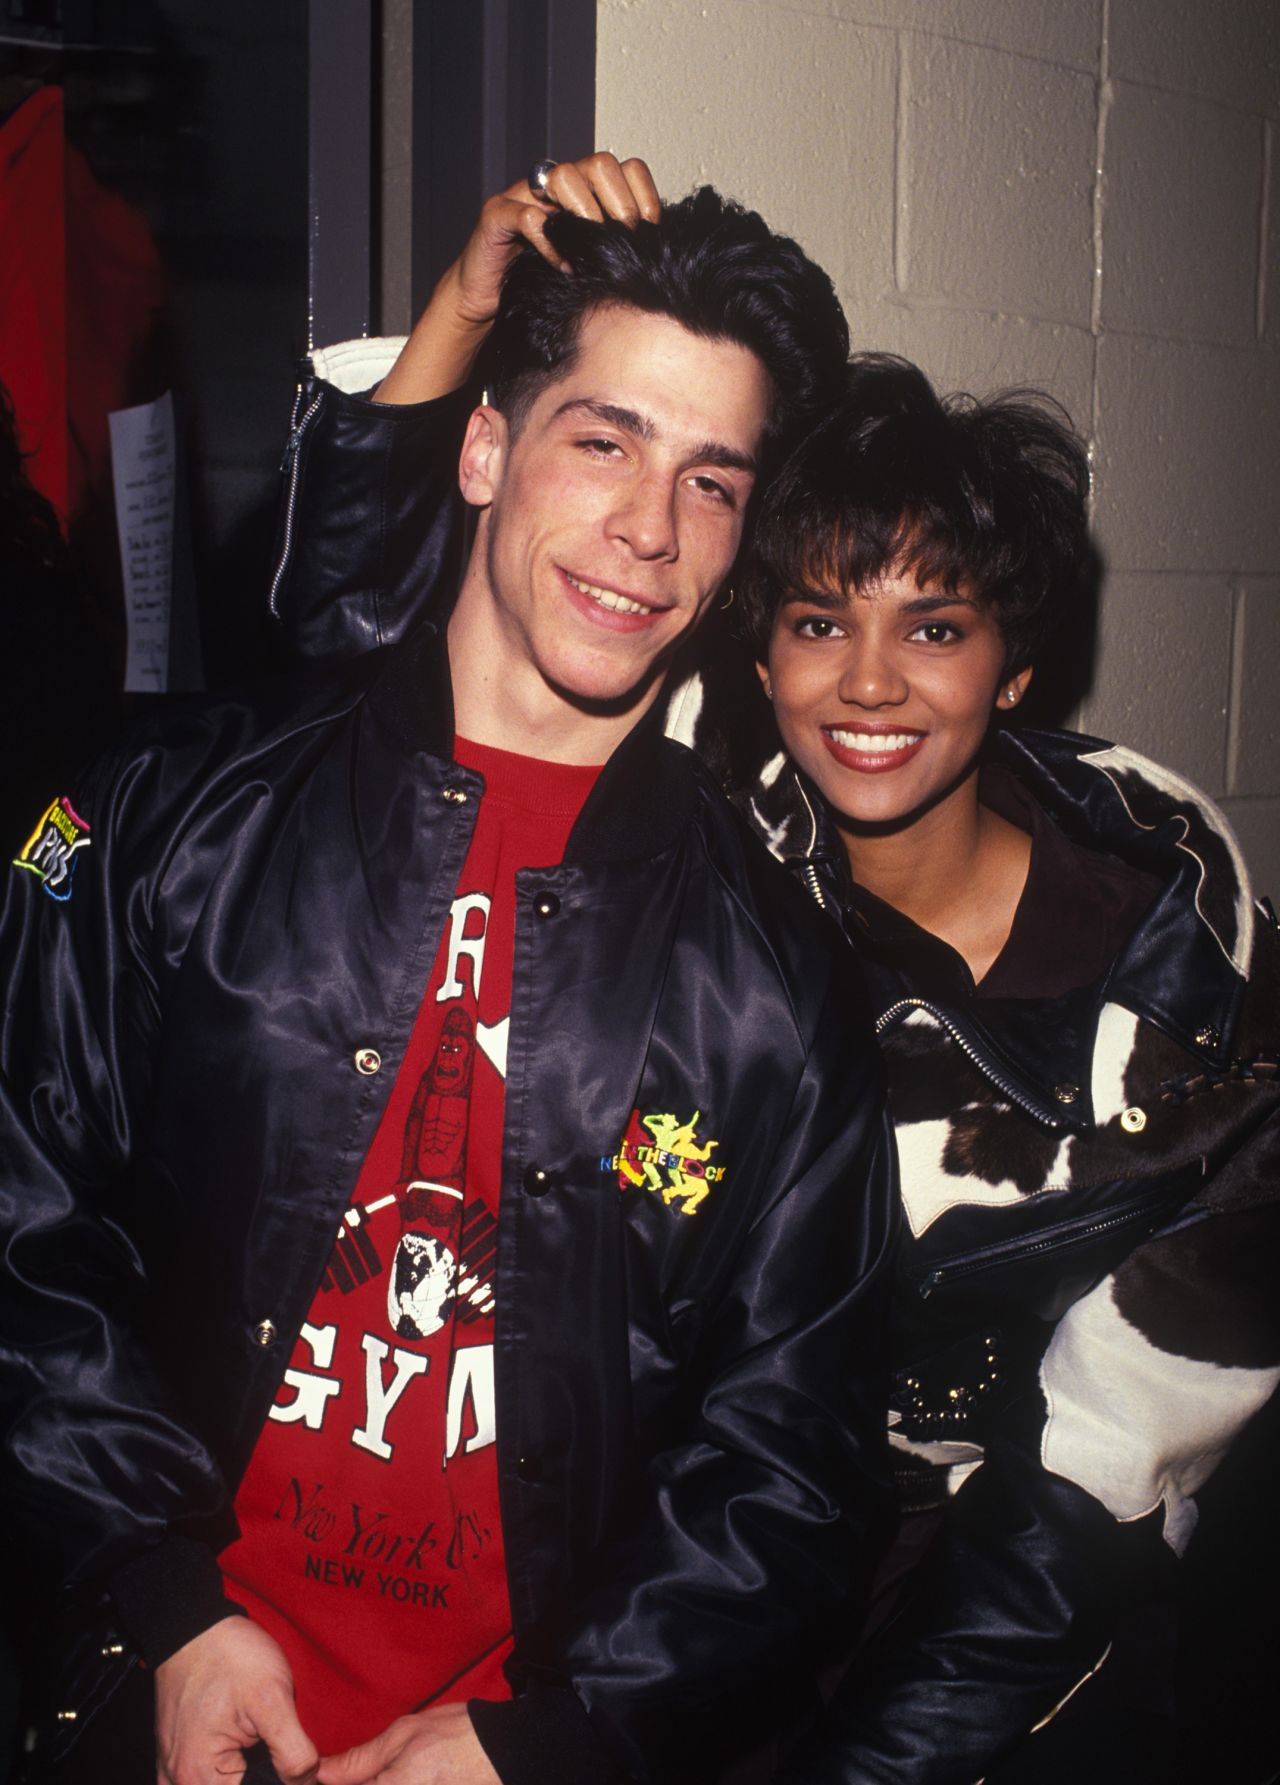 Let's time-travel back to 1989, when New Kids on the Block wasn't an aging boy band but rather the hottest thing on, well, the block. At the time, it did make sense that Danny Wood would fall for another rising star: Halle Berry.